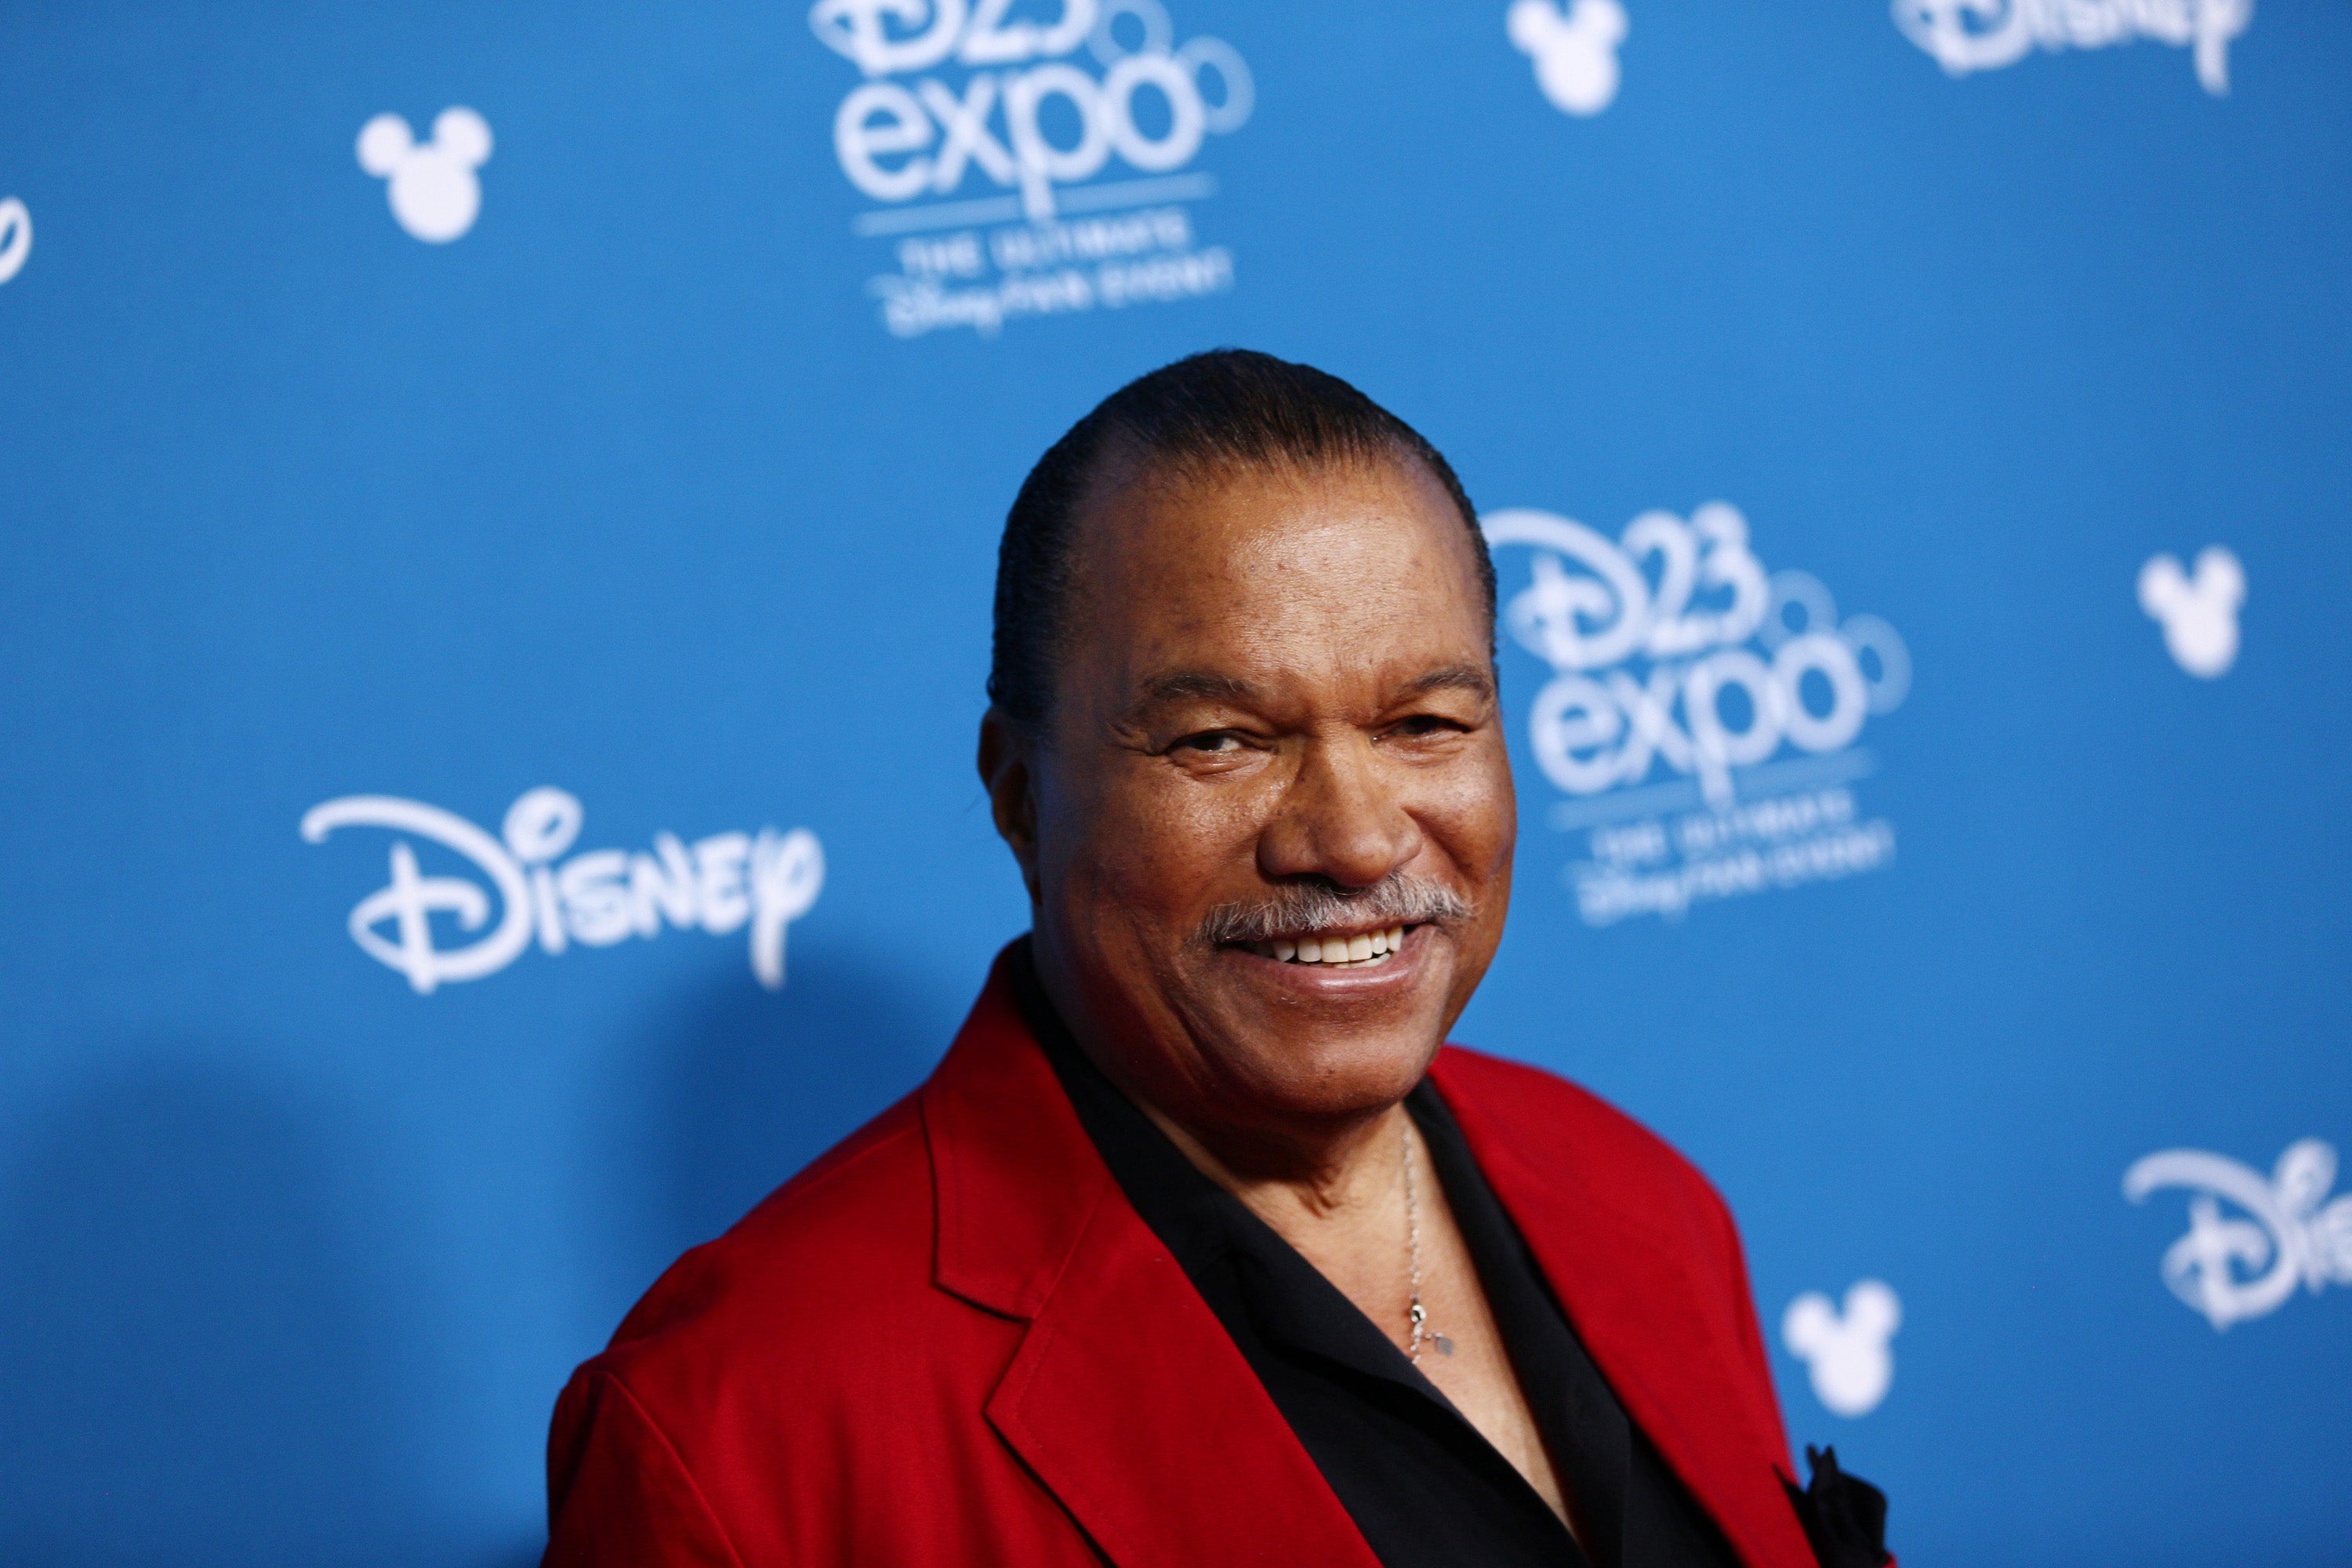 Billy Dee Williams Says He Identifies As Feminine And Masculine: ‘I’m Not Afraid To Show That Side Of Myself’